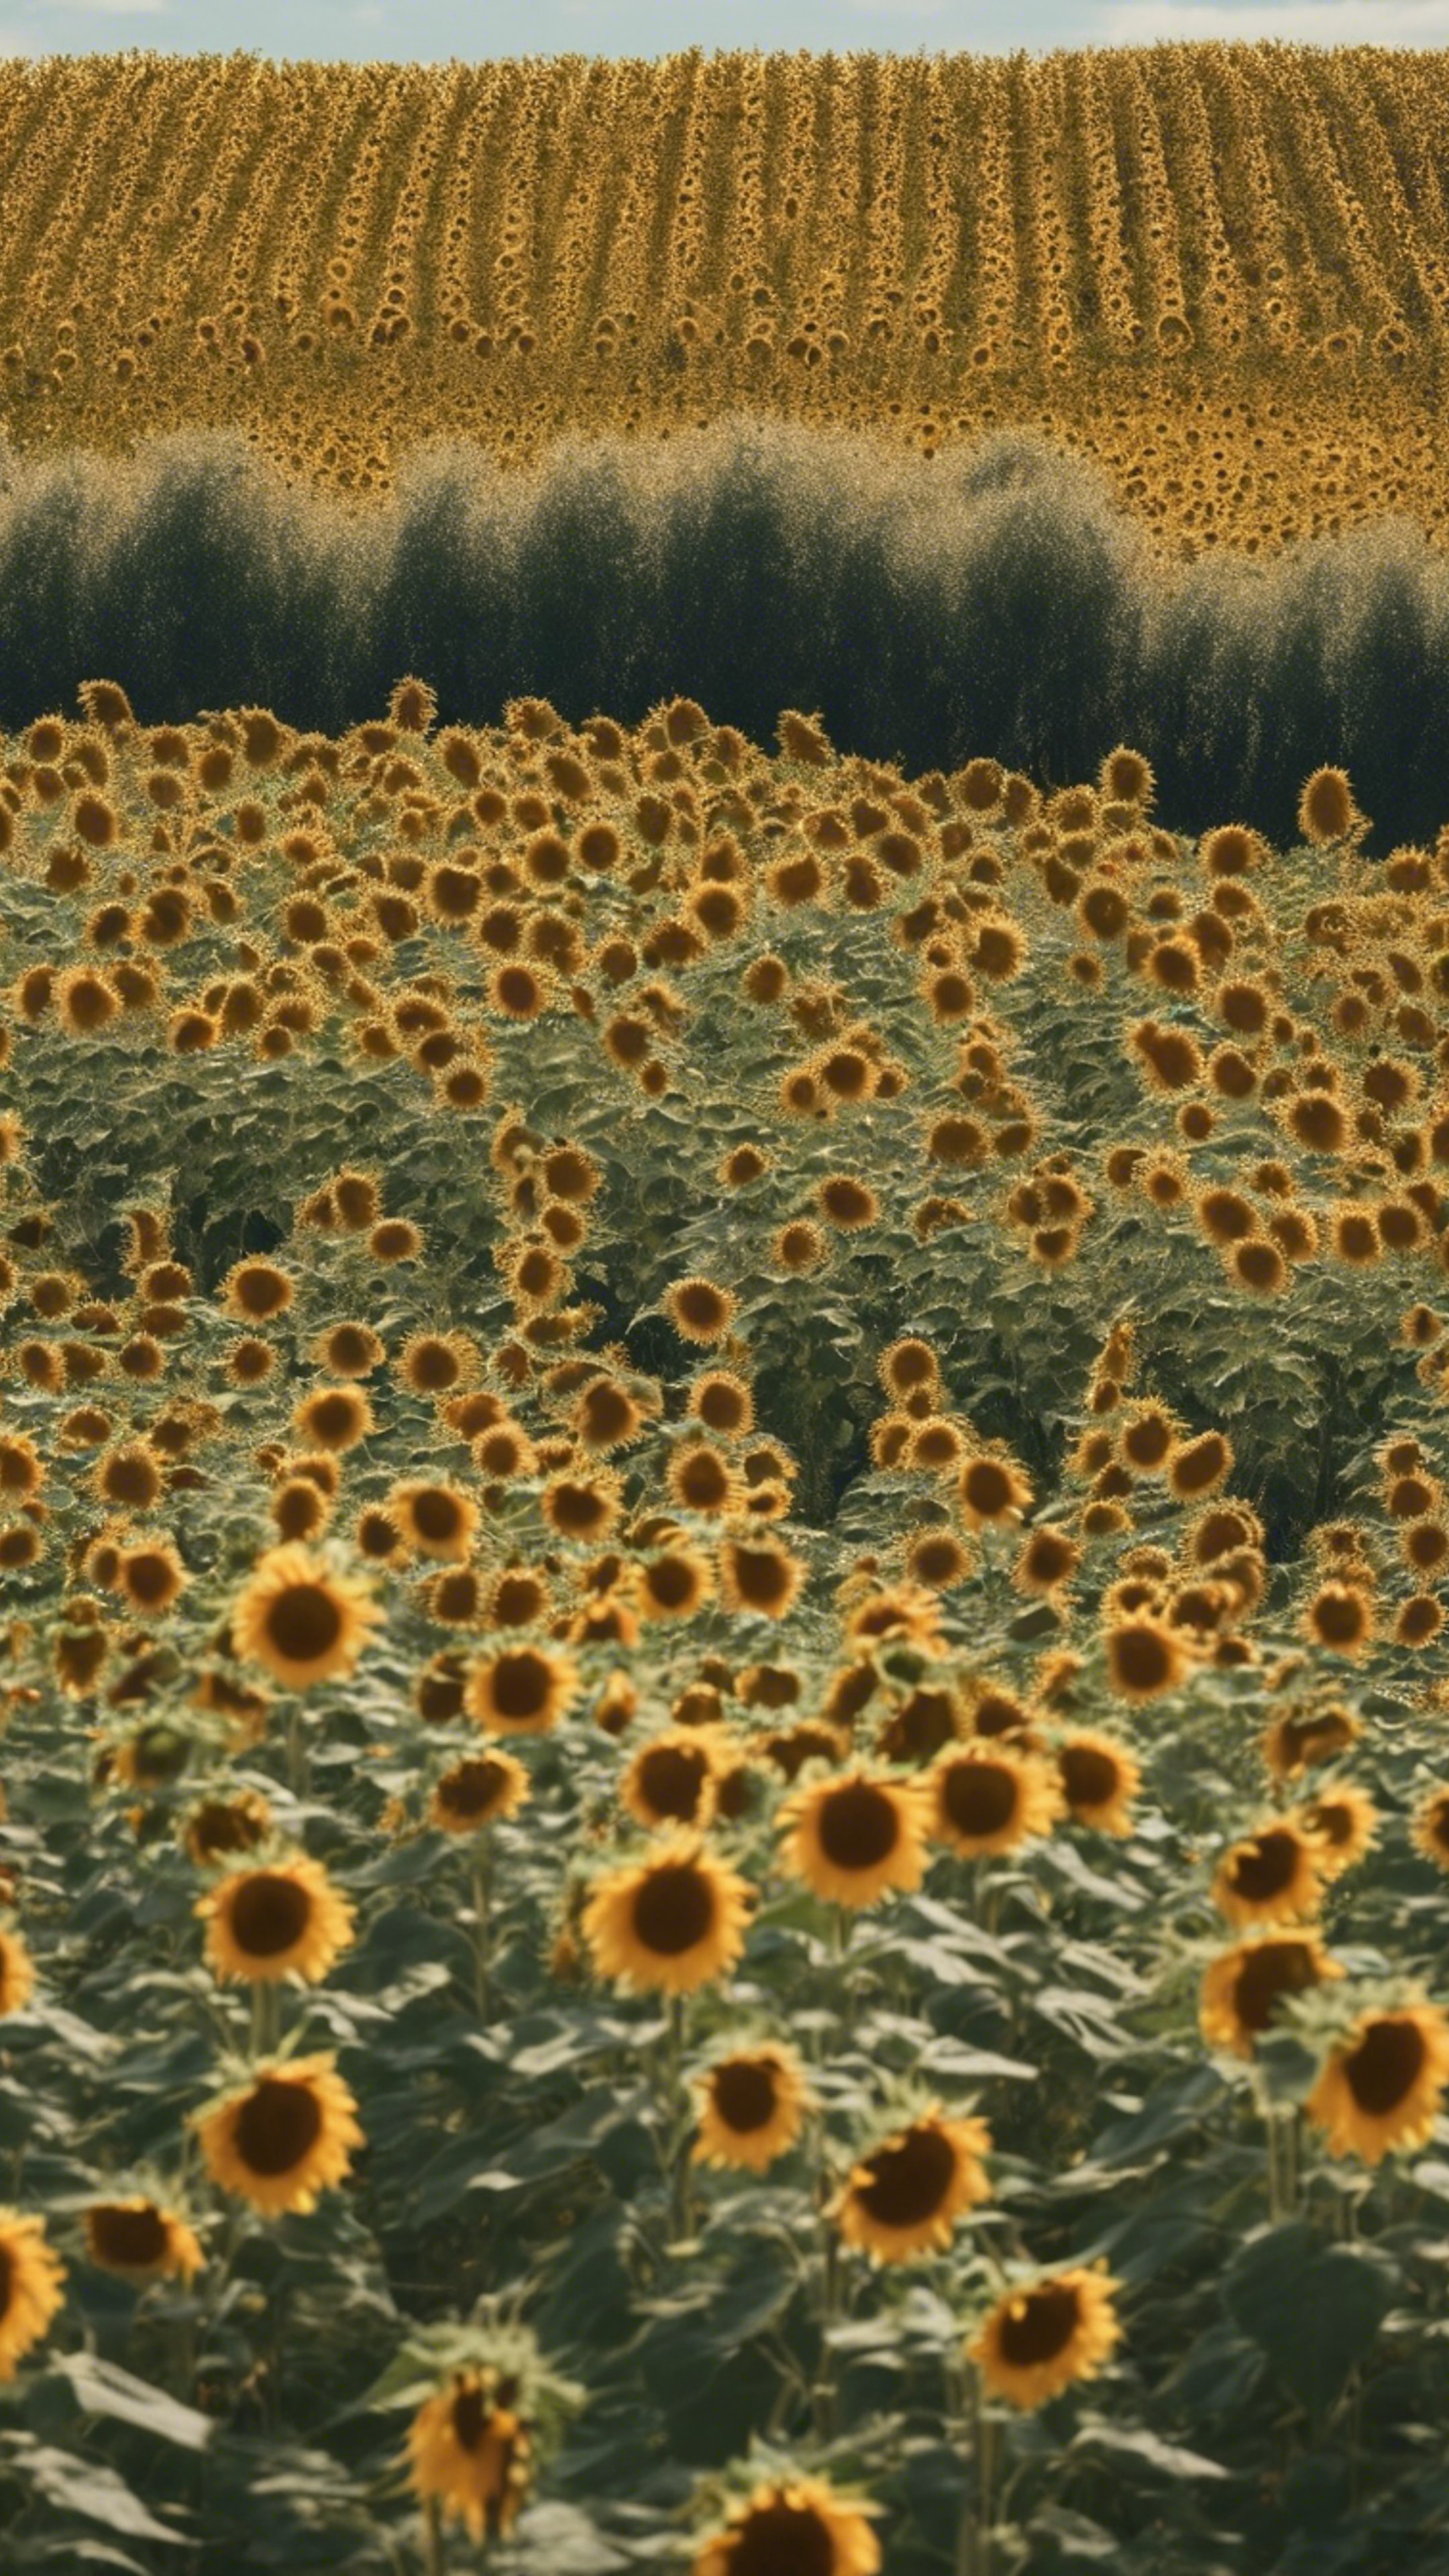 A scenic view of a sunflower field, waving gently in the afternoon breeze壁紙[2b3222060c594642b480]